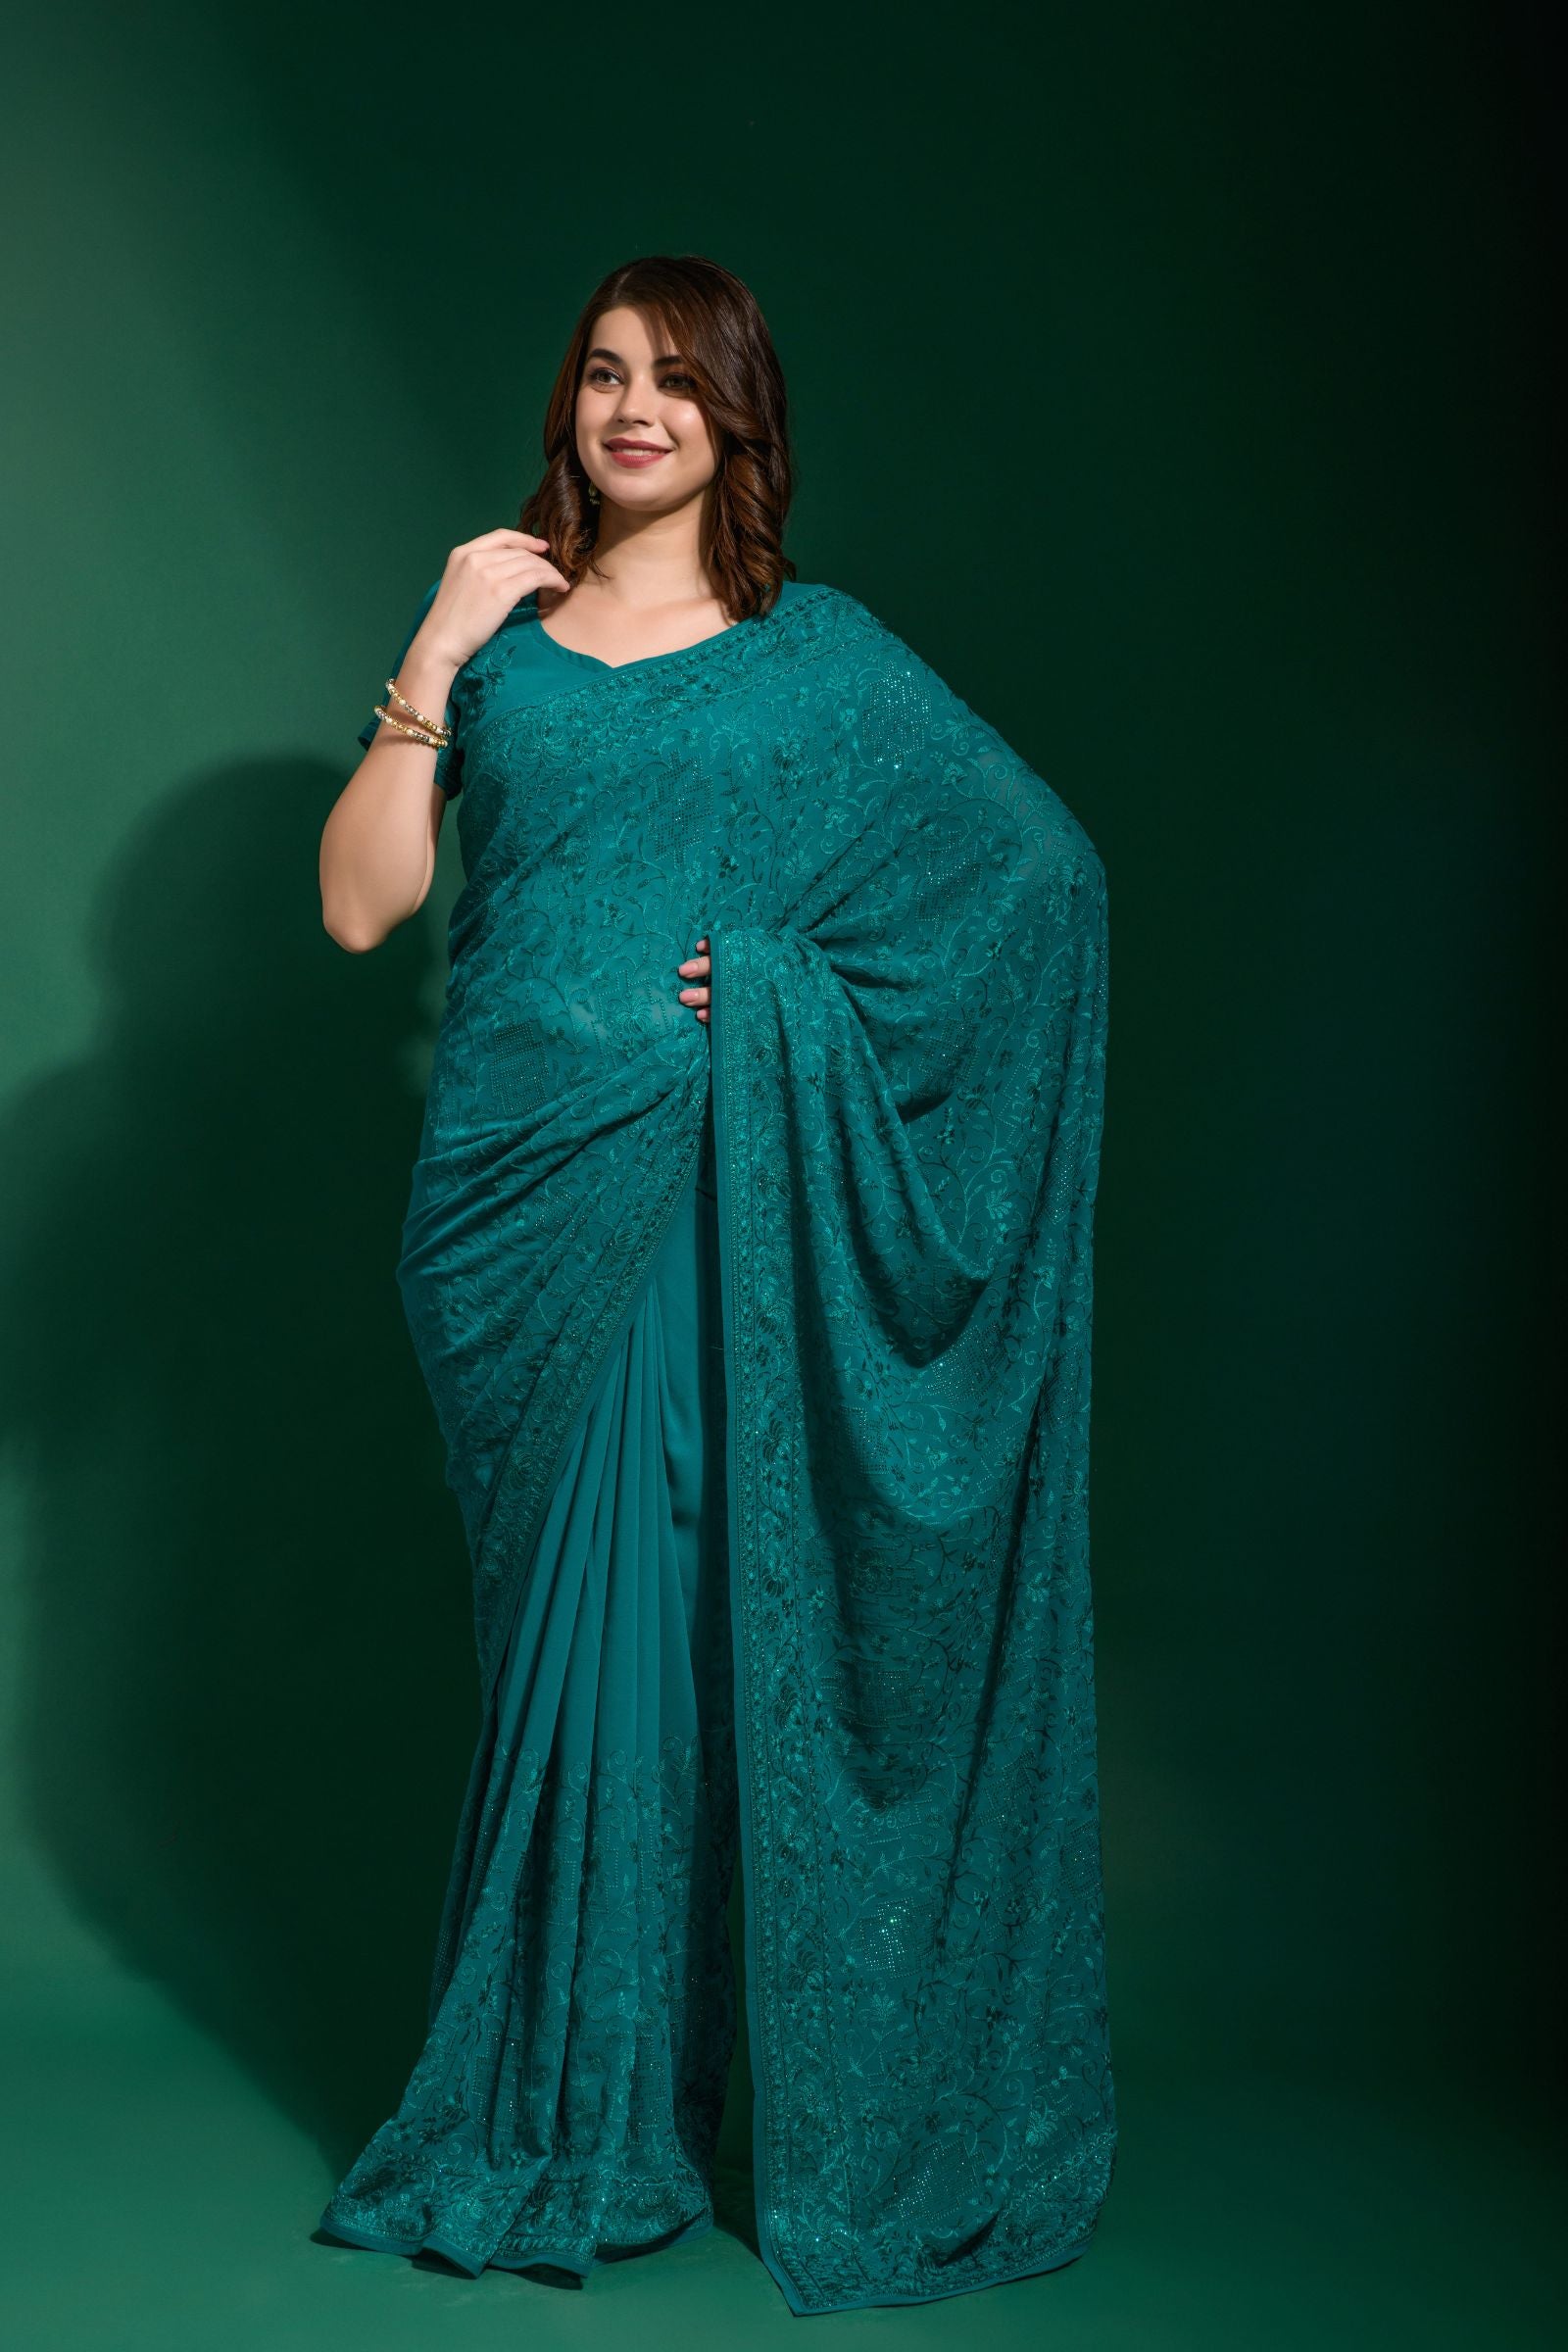 Teal Blue Embroidered Georgette Saree